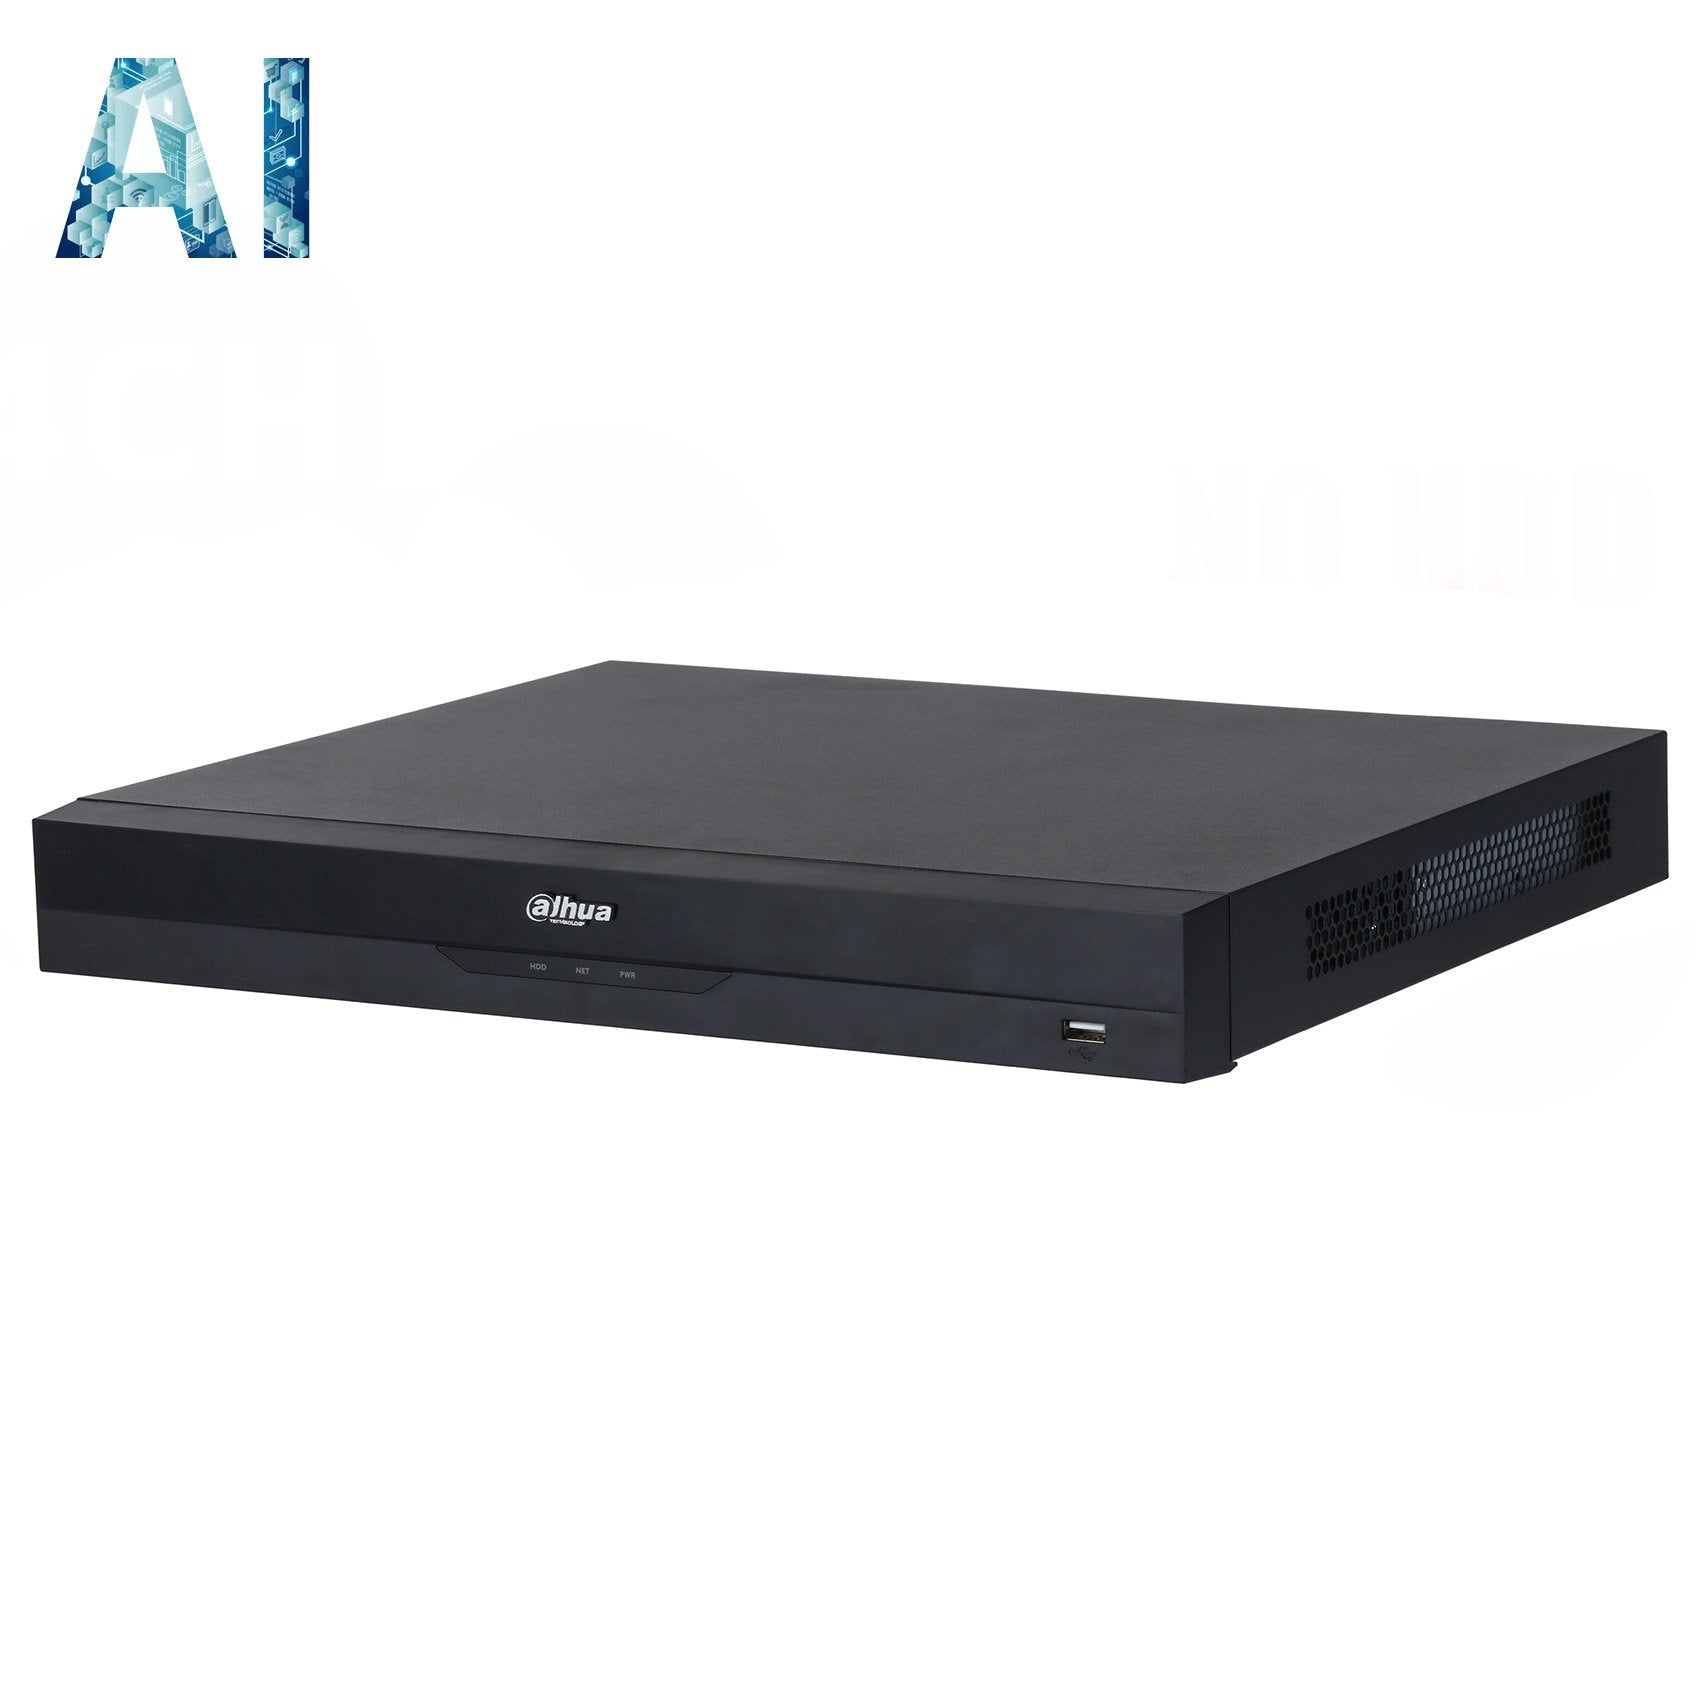 Dahua 16 Channel, WizSense AI Series, 16 x POE, 1RU, 256MB (184MB With AI Function Enabled), 1 x Gigabit NIC, 2 x HDD **NO HDD INSTALLED**